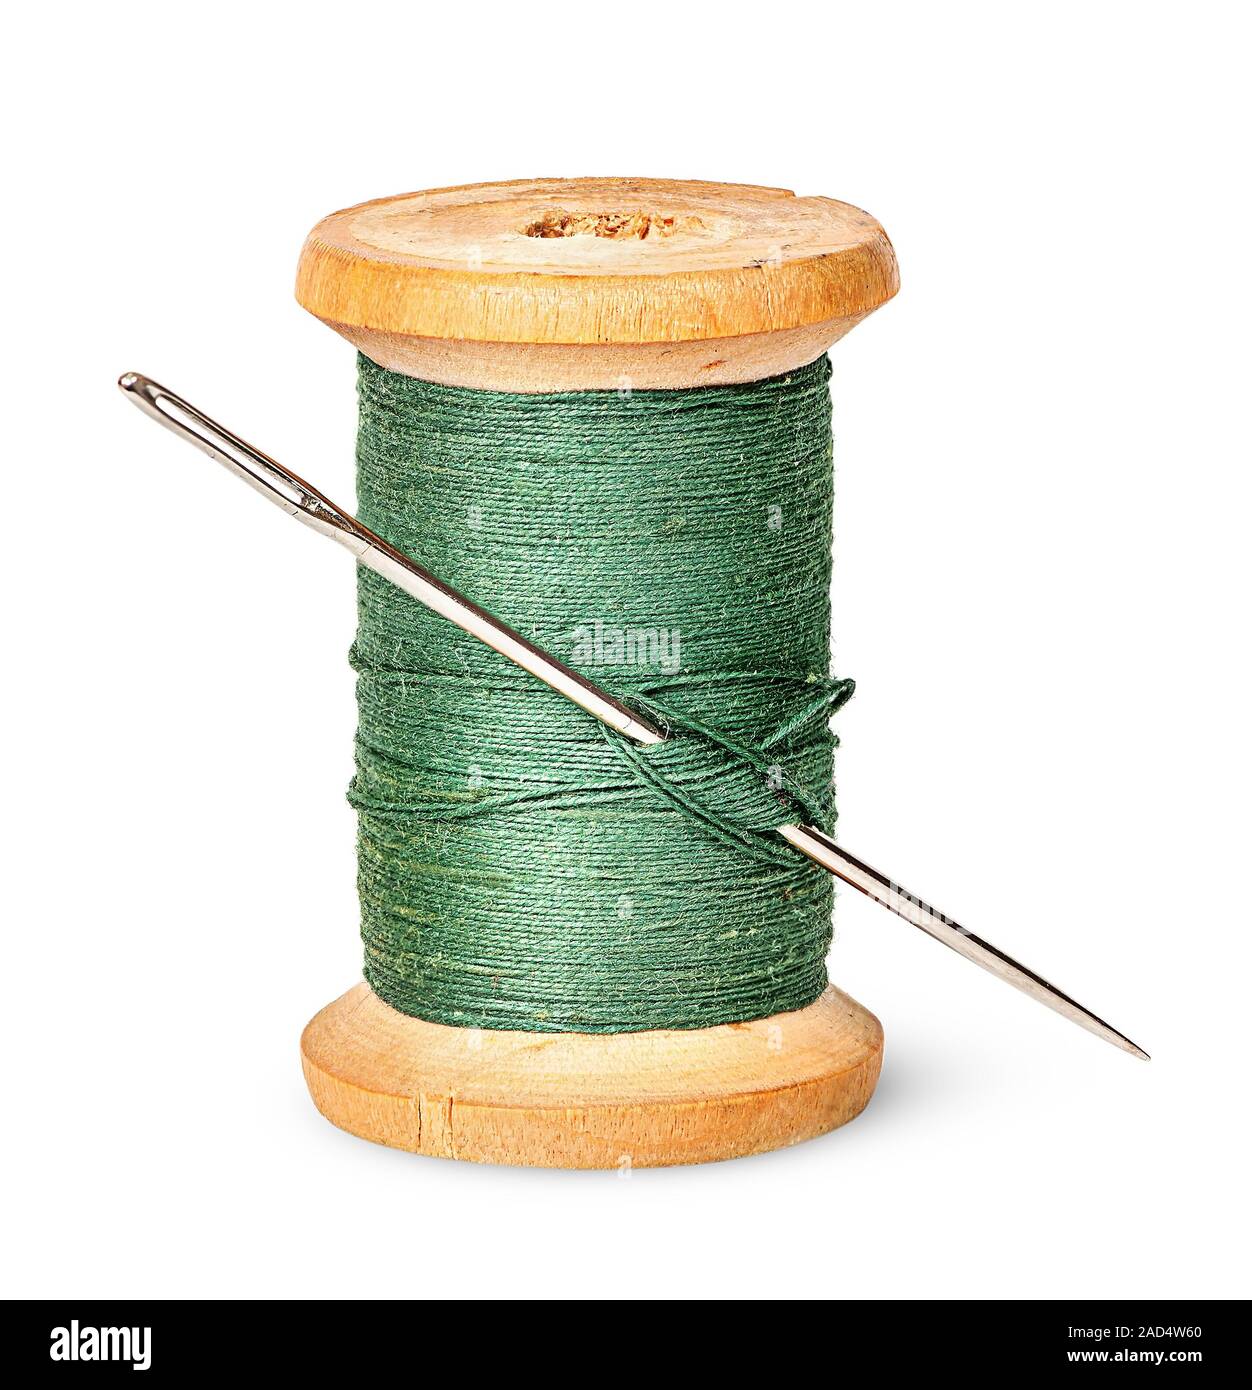 Needle and thread on wooden spool vertically Stock Photo